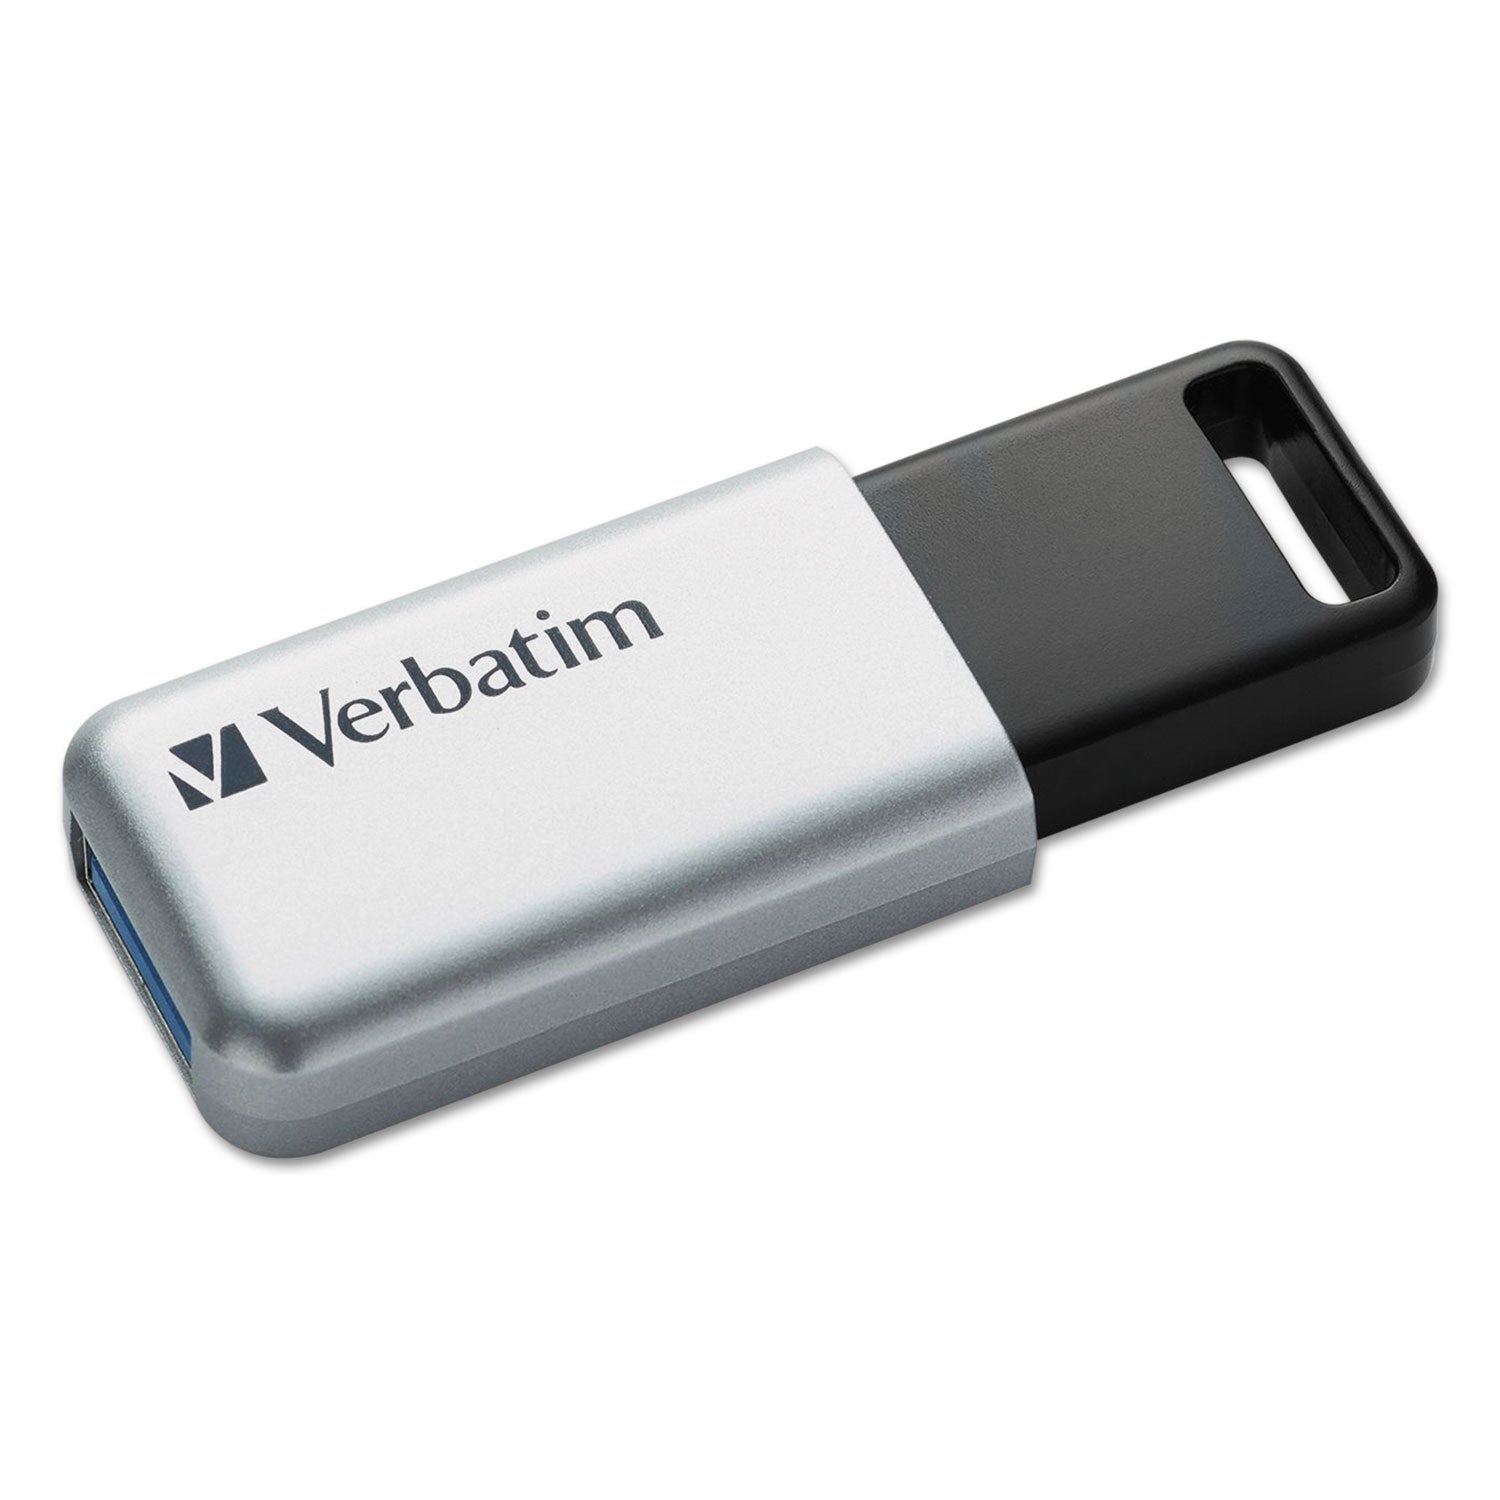 store-n-go-secure-pro-usb-flash-drive-with-aes-256-encryption-16-gb-silver_ver98664 - 2